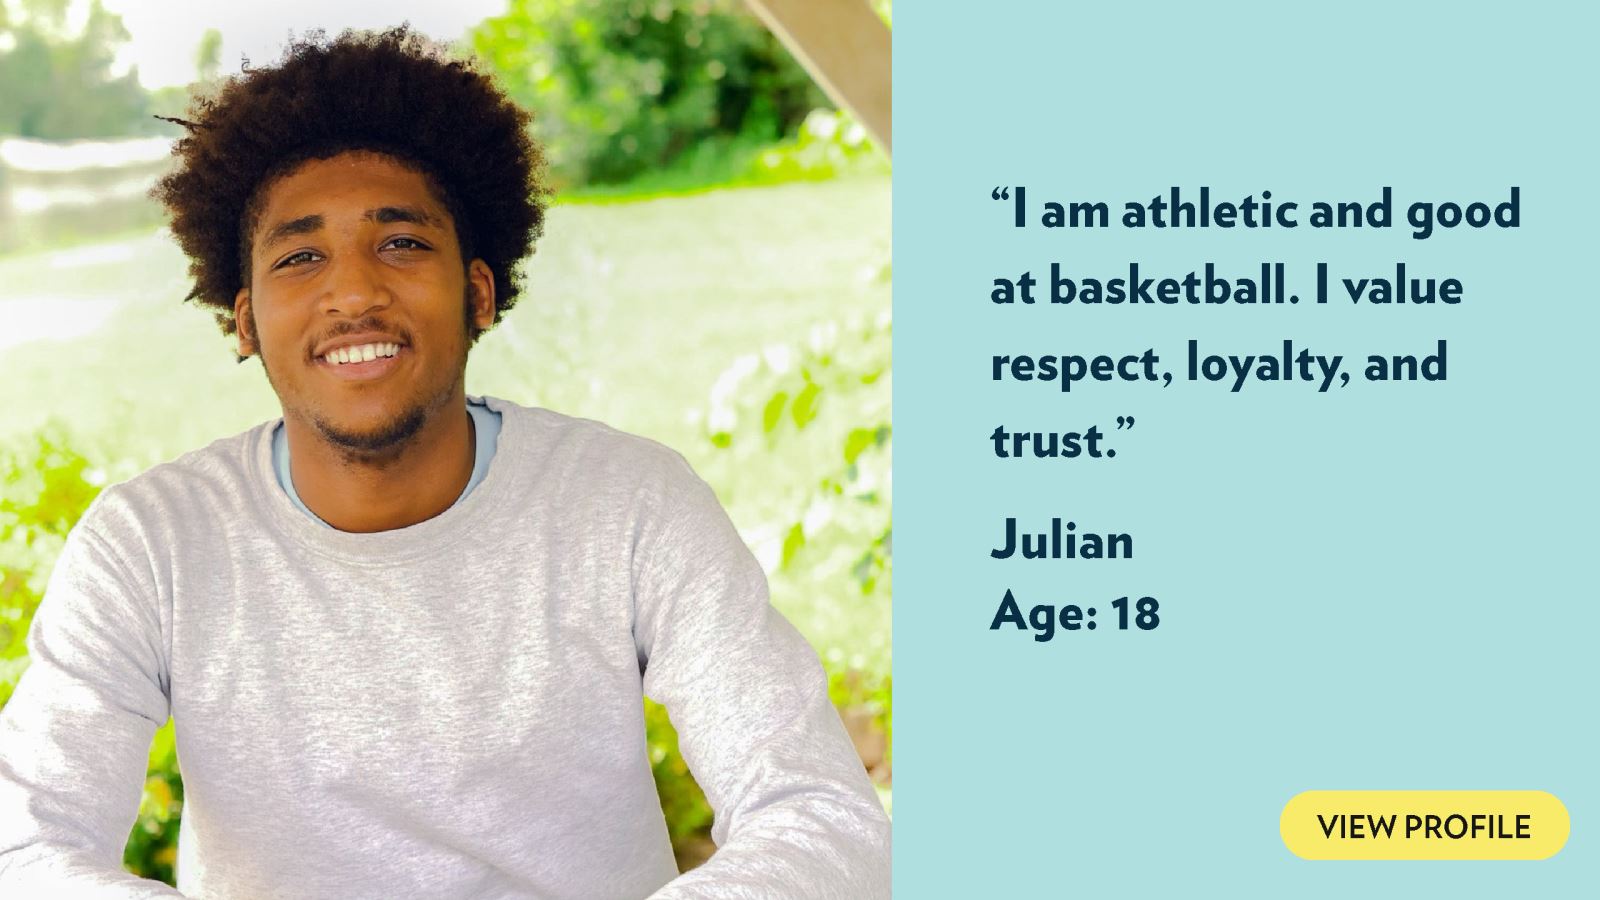 I am athletic and good at basketball. I value respect, loyalty, and trust. Julian, age 18. View profile.